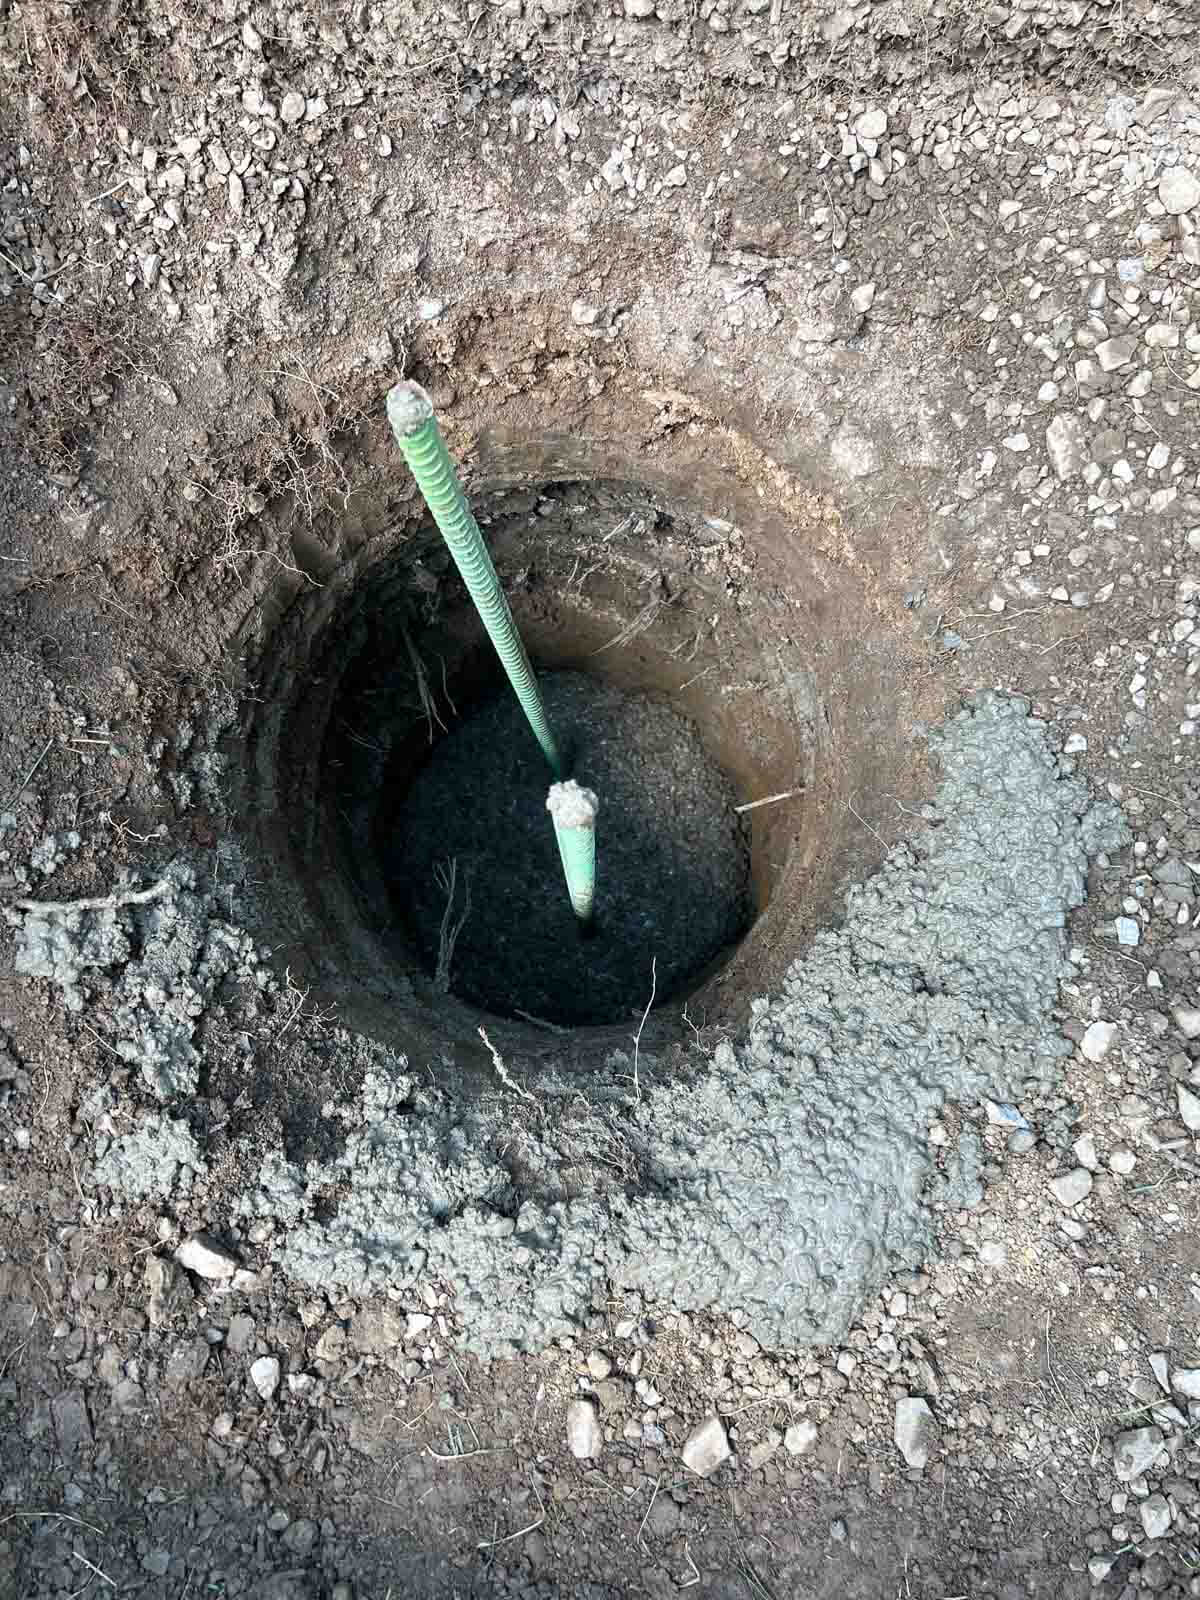 hole in ground with rebarb sticking out.